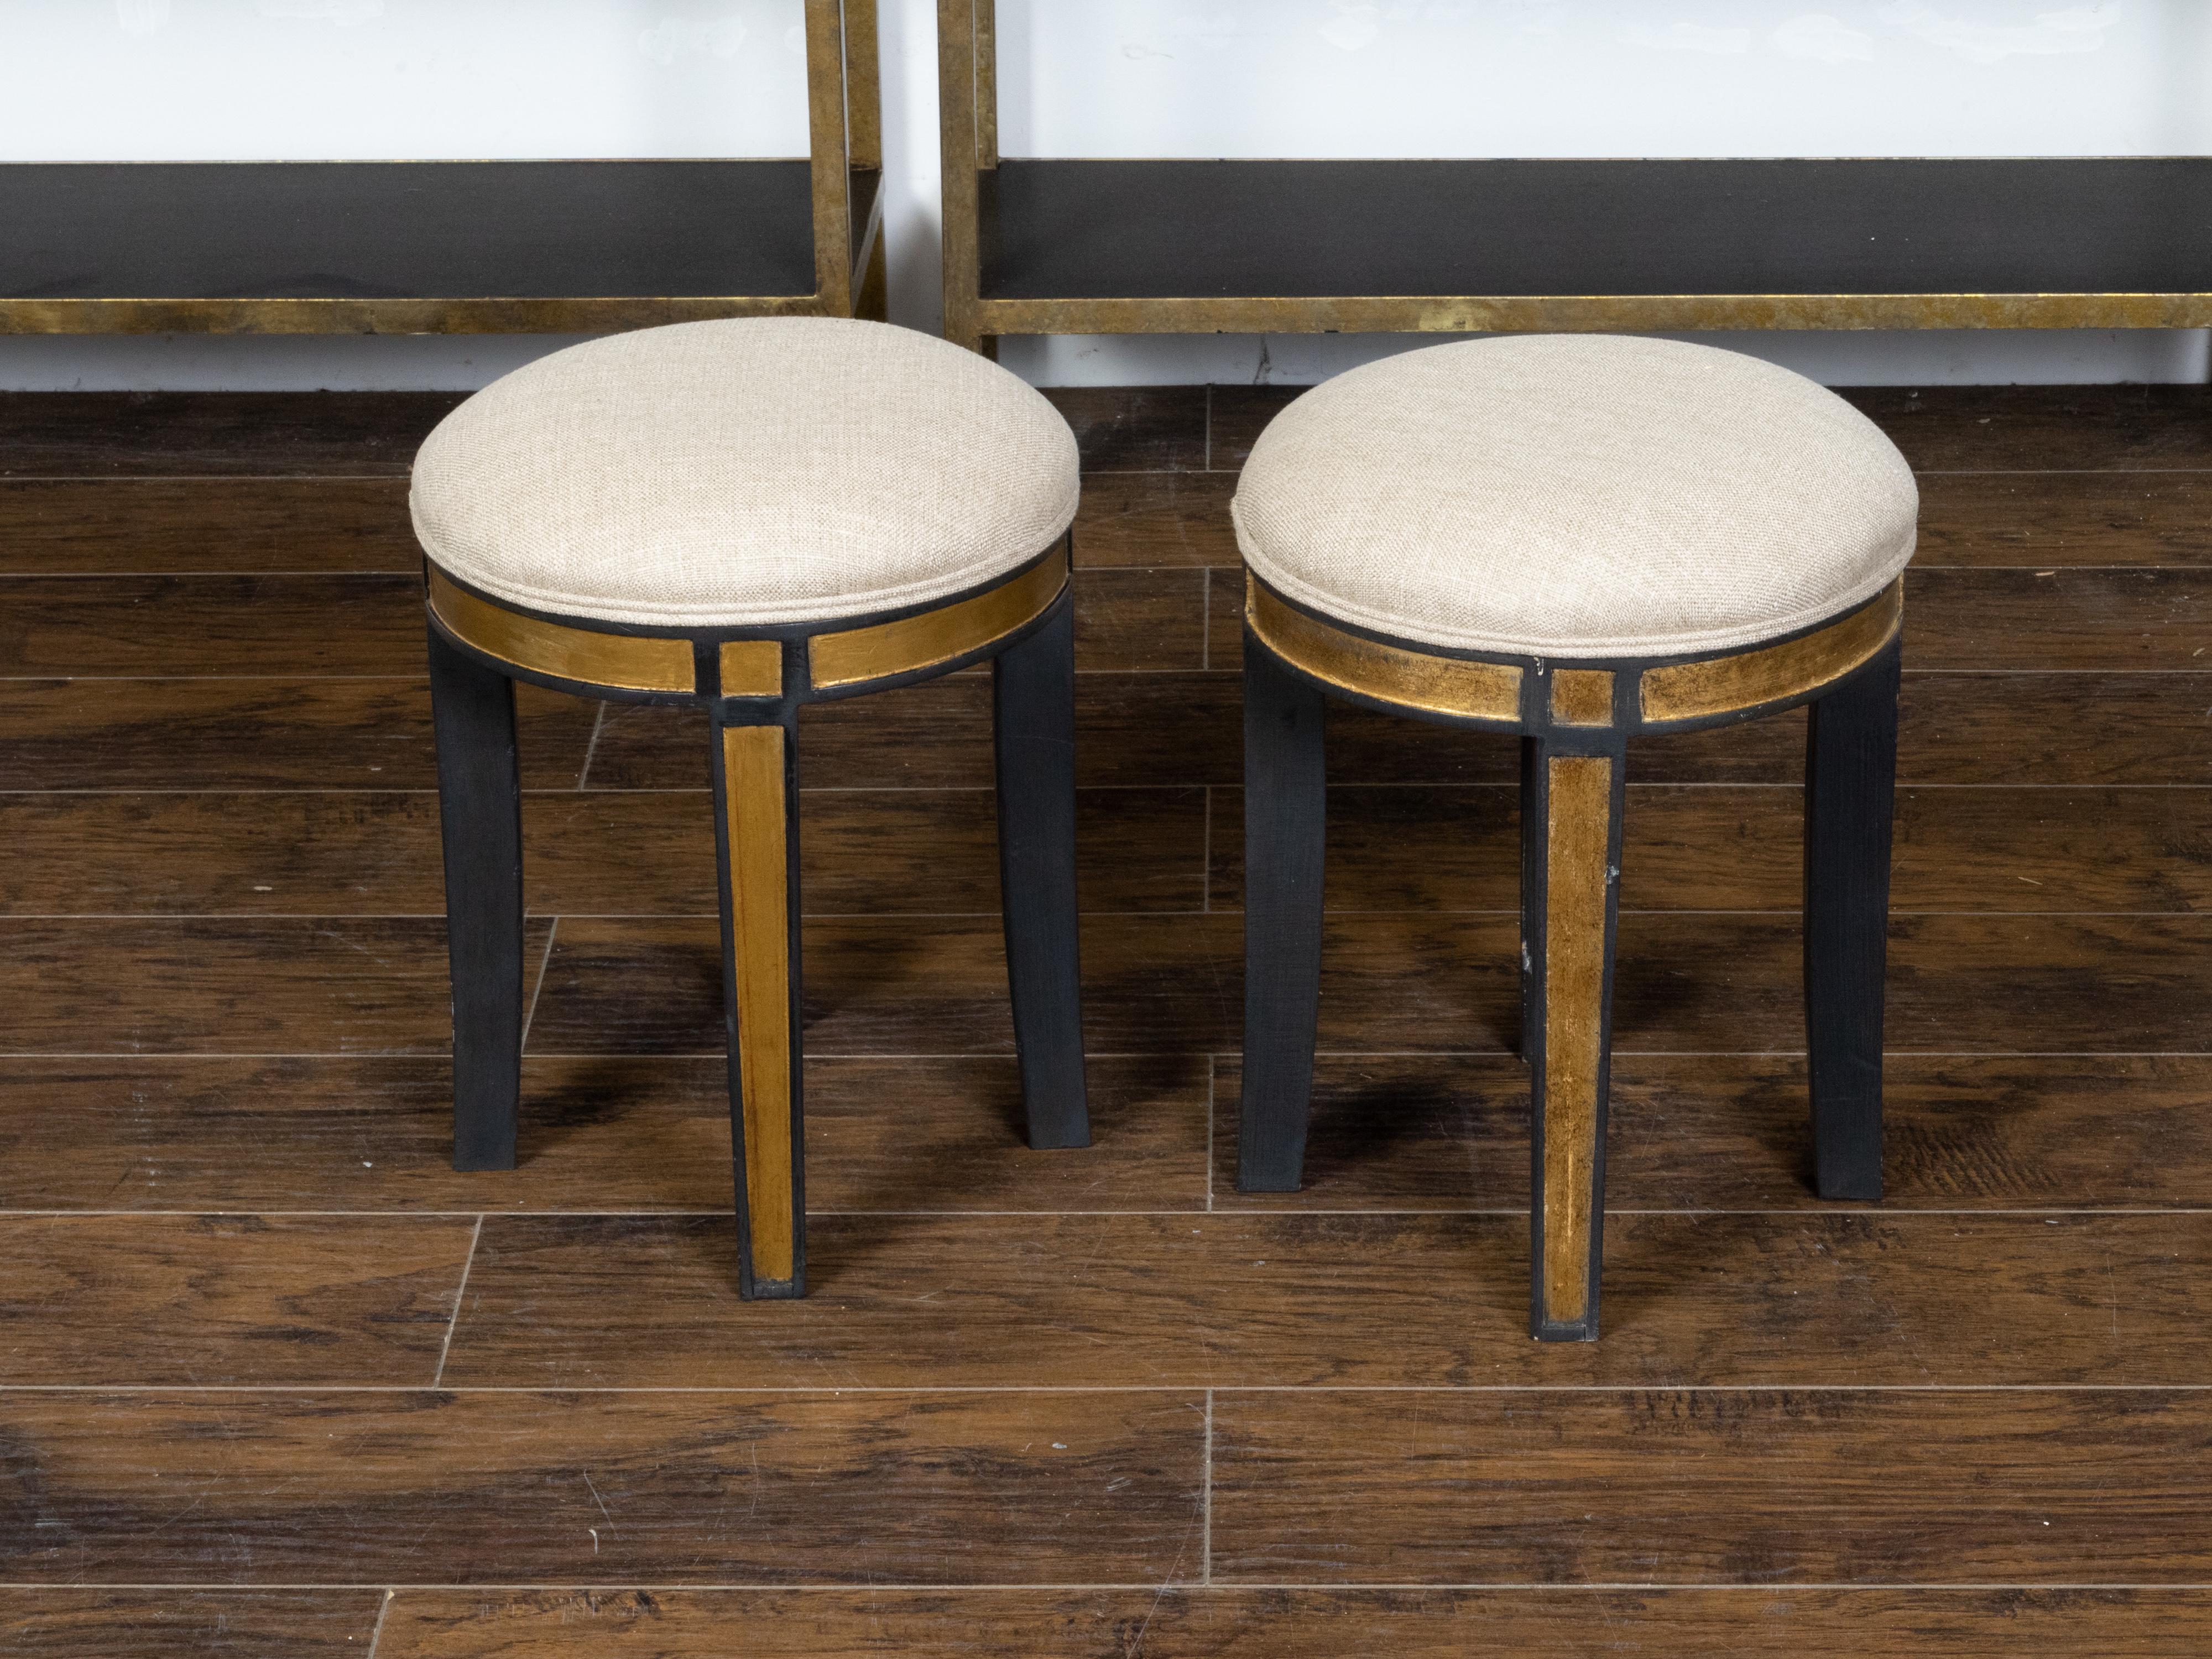 A pair of vintage Italian stools from the mid 20th century, with round upholstered seats, black paint and gilt accents. Created in Italy during the Midcentury period, each of this pair of stools features a circular top newly recovered with a double